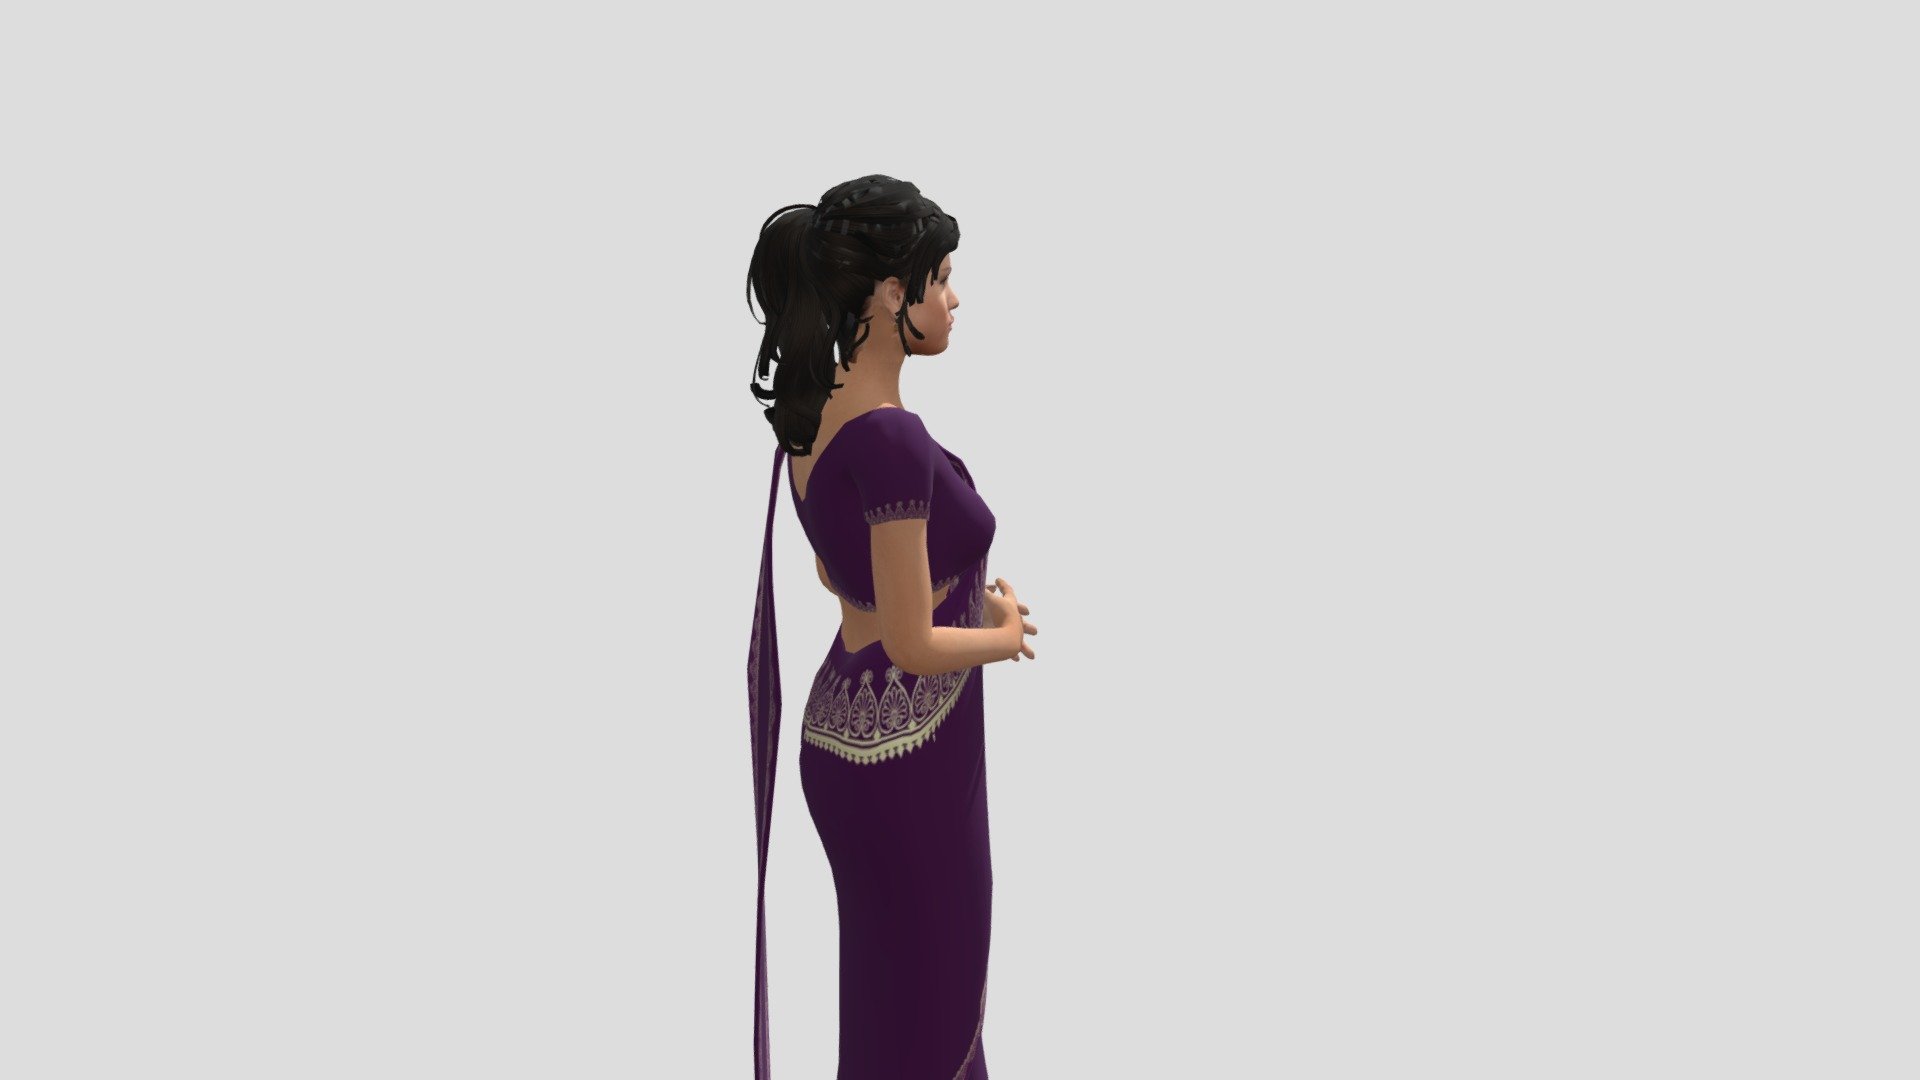 Selena Gomez (actress and singer)  3d model with traditional Indian dress saree made with blender 3d and Adobe Phooshop cc..

For Buy this, click the below link: https://cutt.ly/FcBo8uX

For Negotiable price contact my Gmail (imthirutj@gmail.com) or put a message in my inbox in CgTrade

Comment below if you want another model.... 3d model